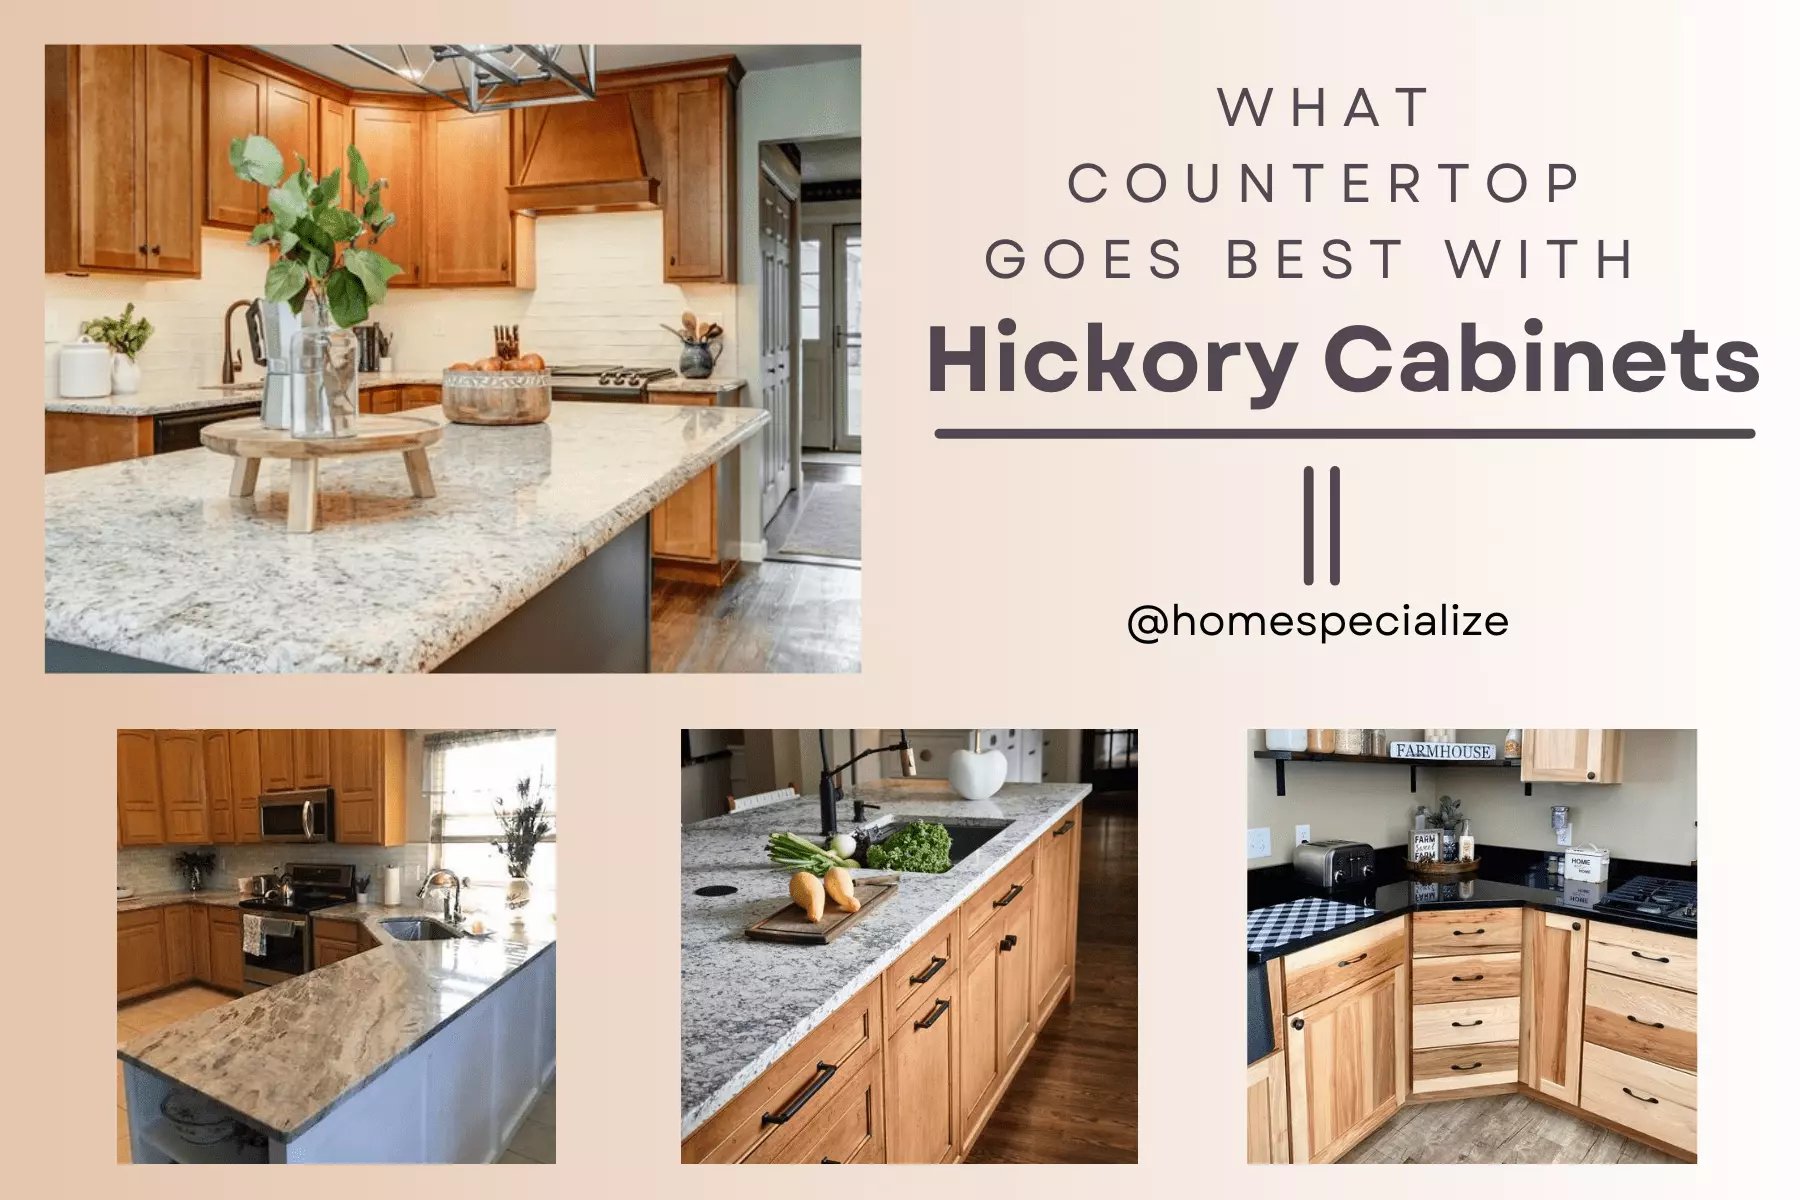 What Countertop Goes Best with Hickory Cabinets